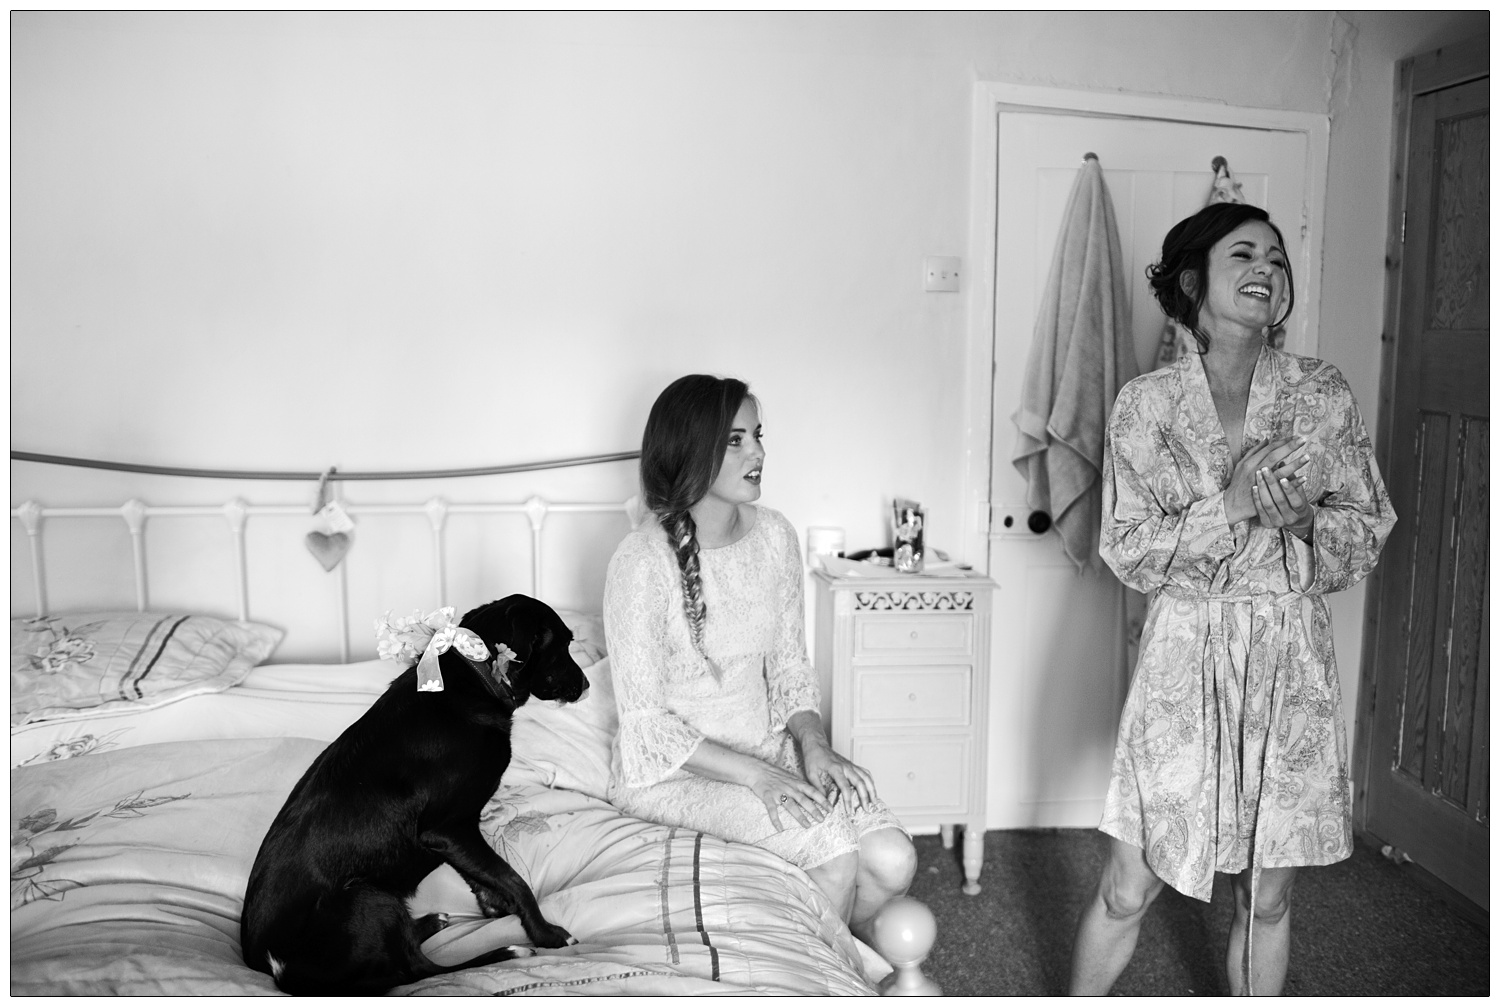 Bride is in a dressing gown with her sister, a dog sits on the bed.